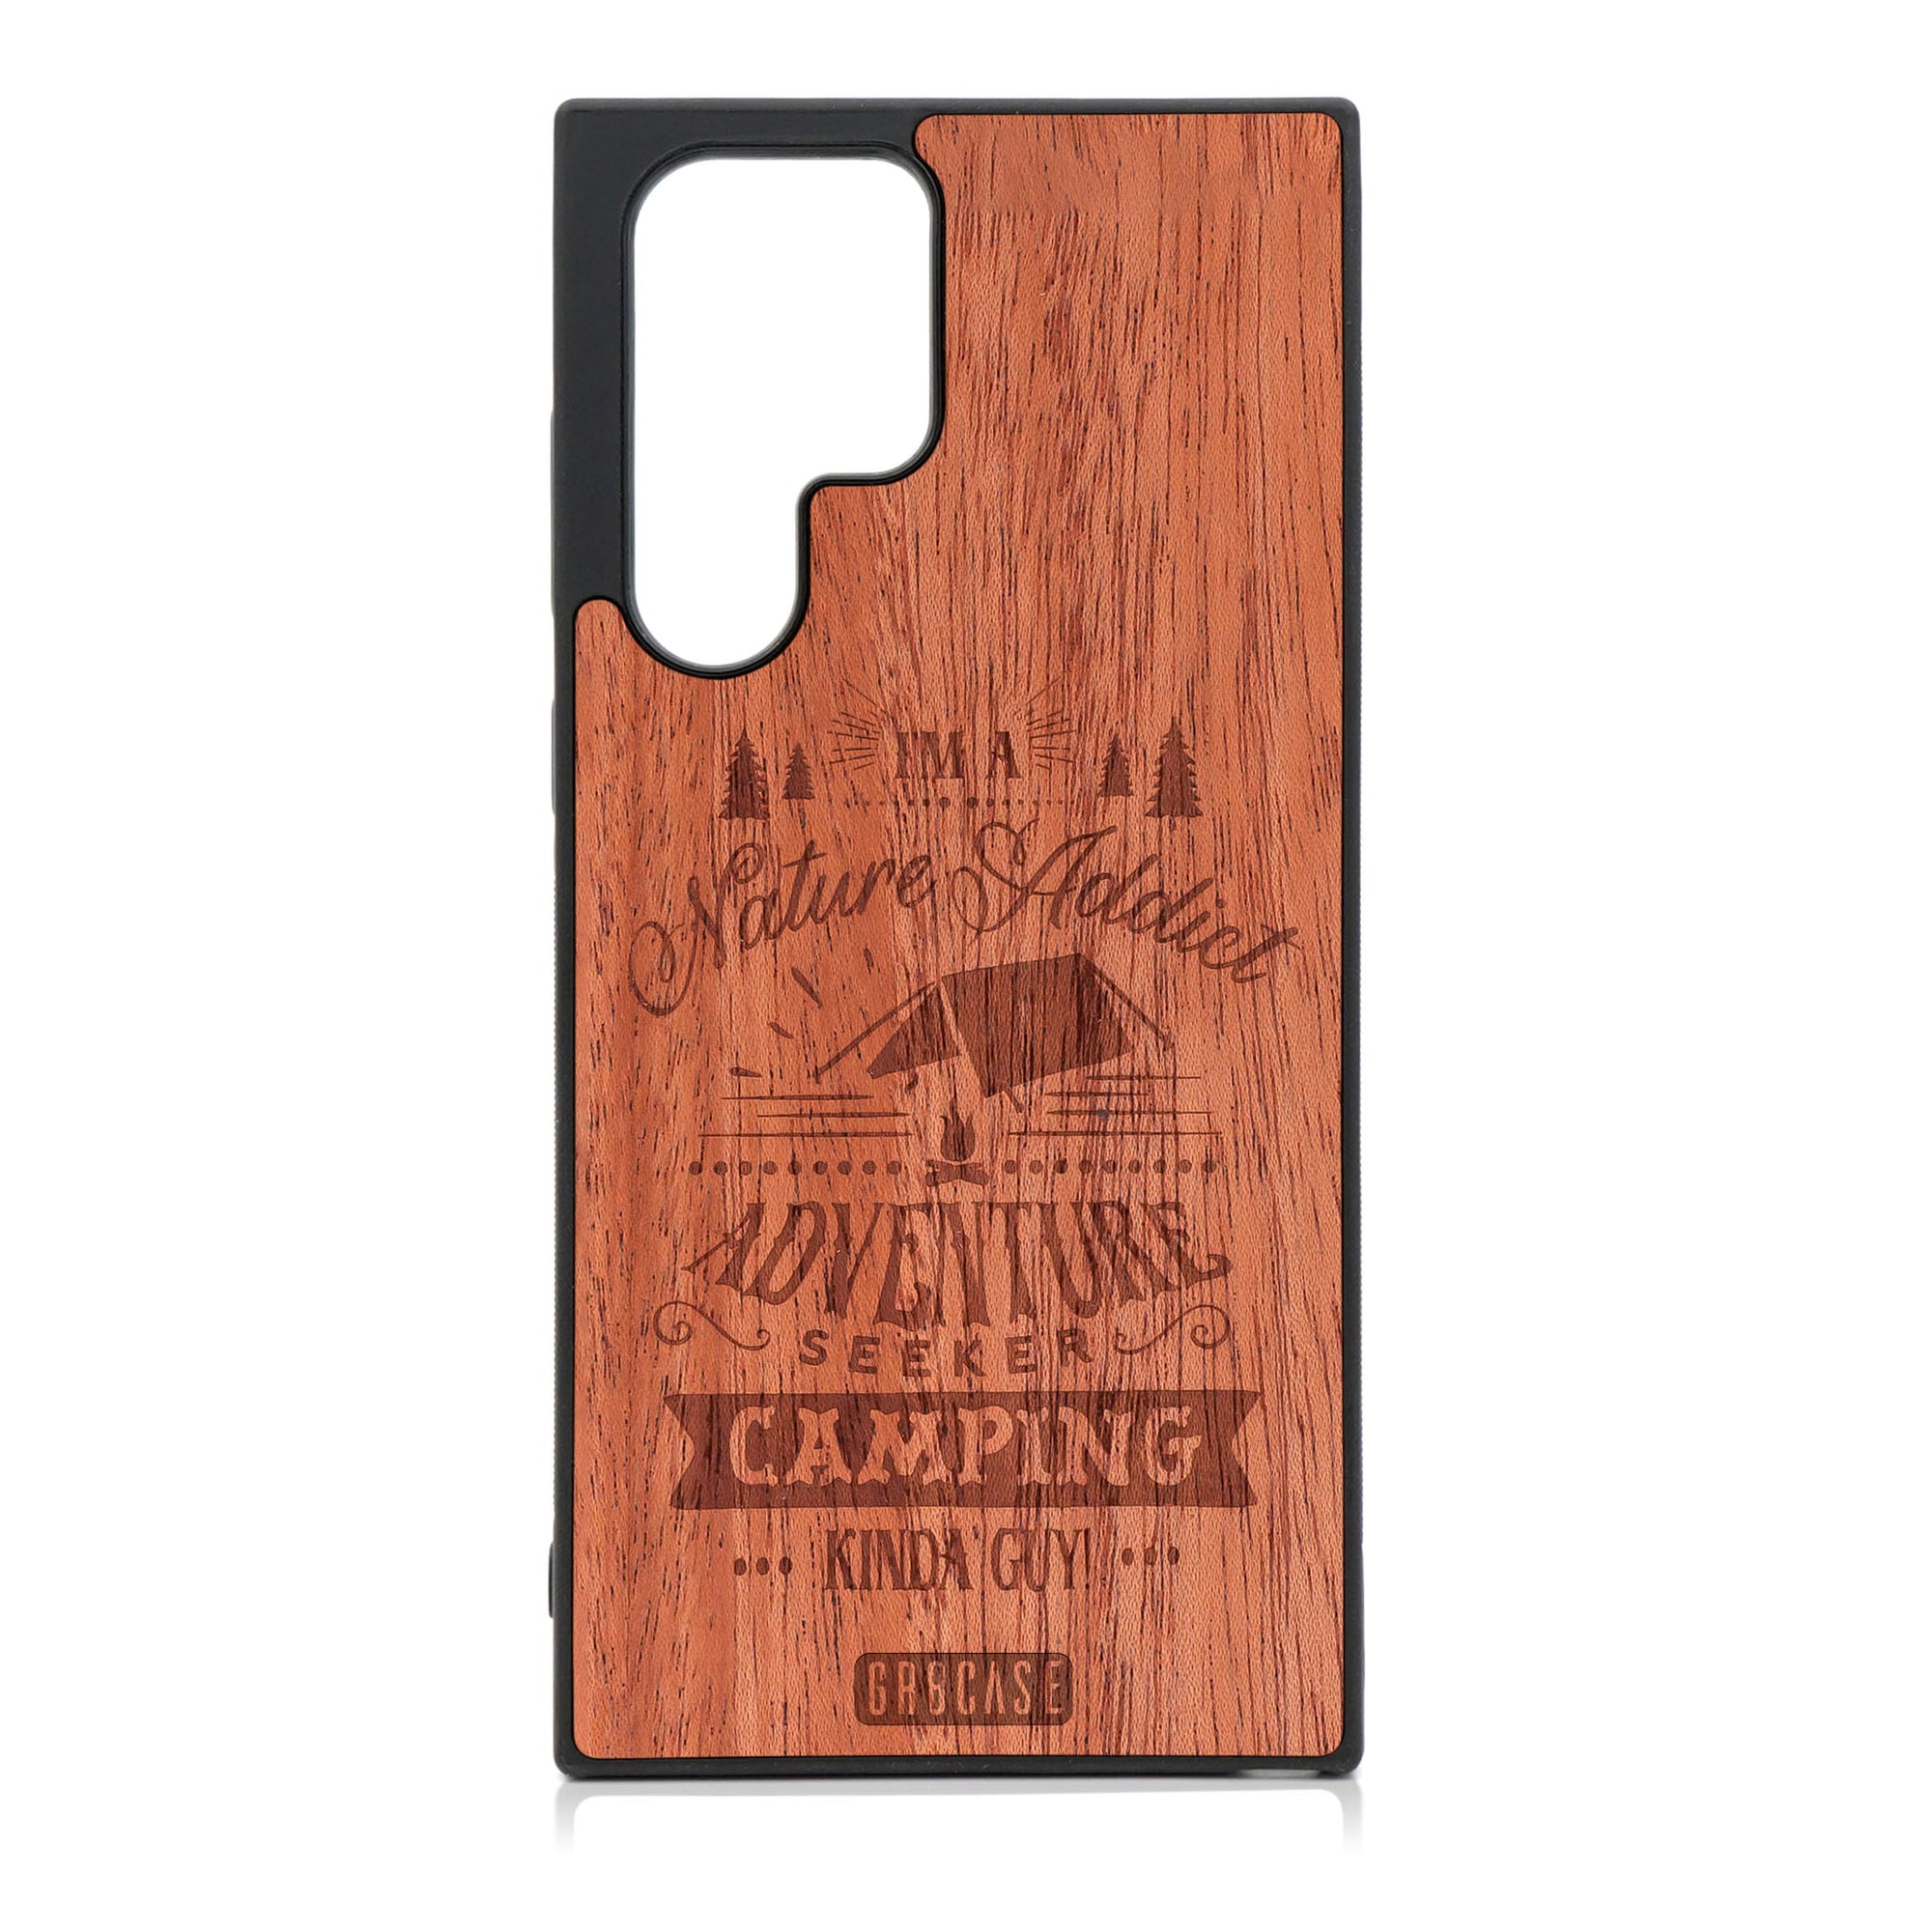 I'm A Nature Addict Adventure Seeker Camping Kinda Guy Design Wood Phone Case For Galaxy S22 Ultra